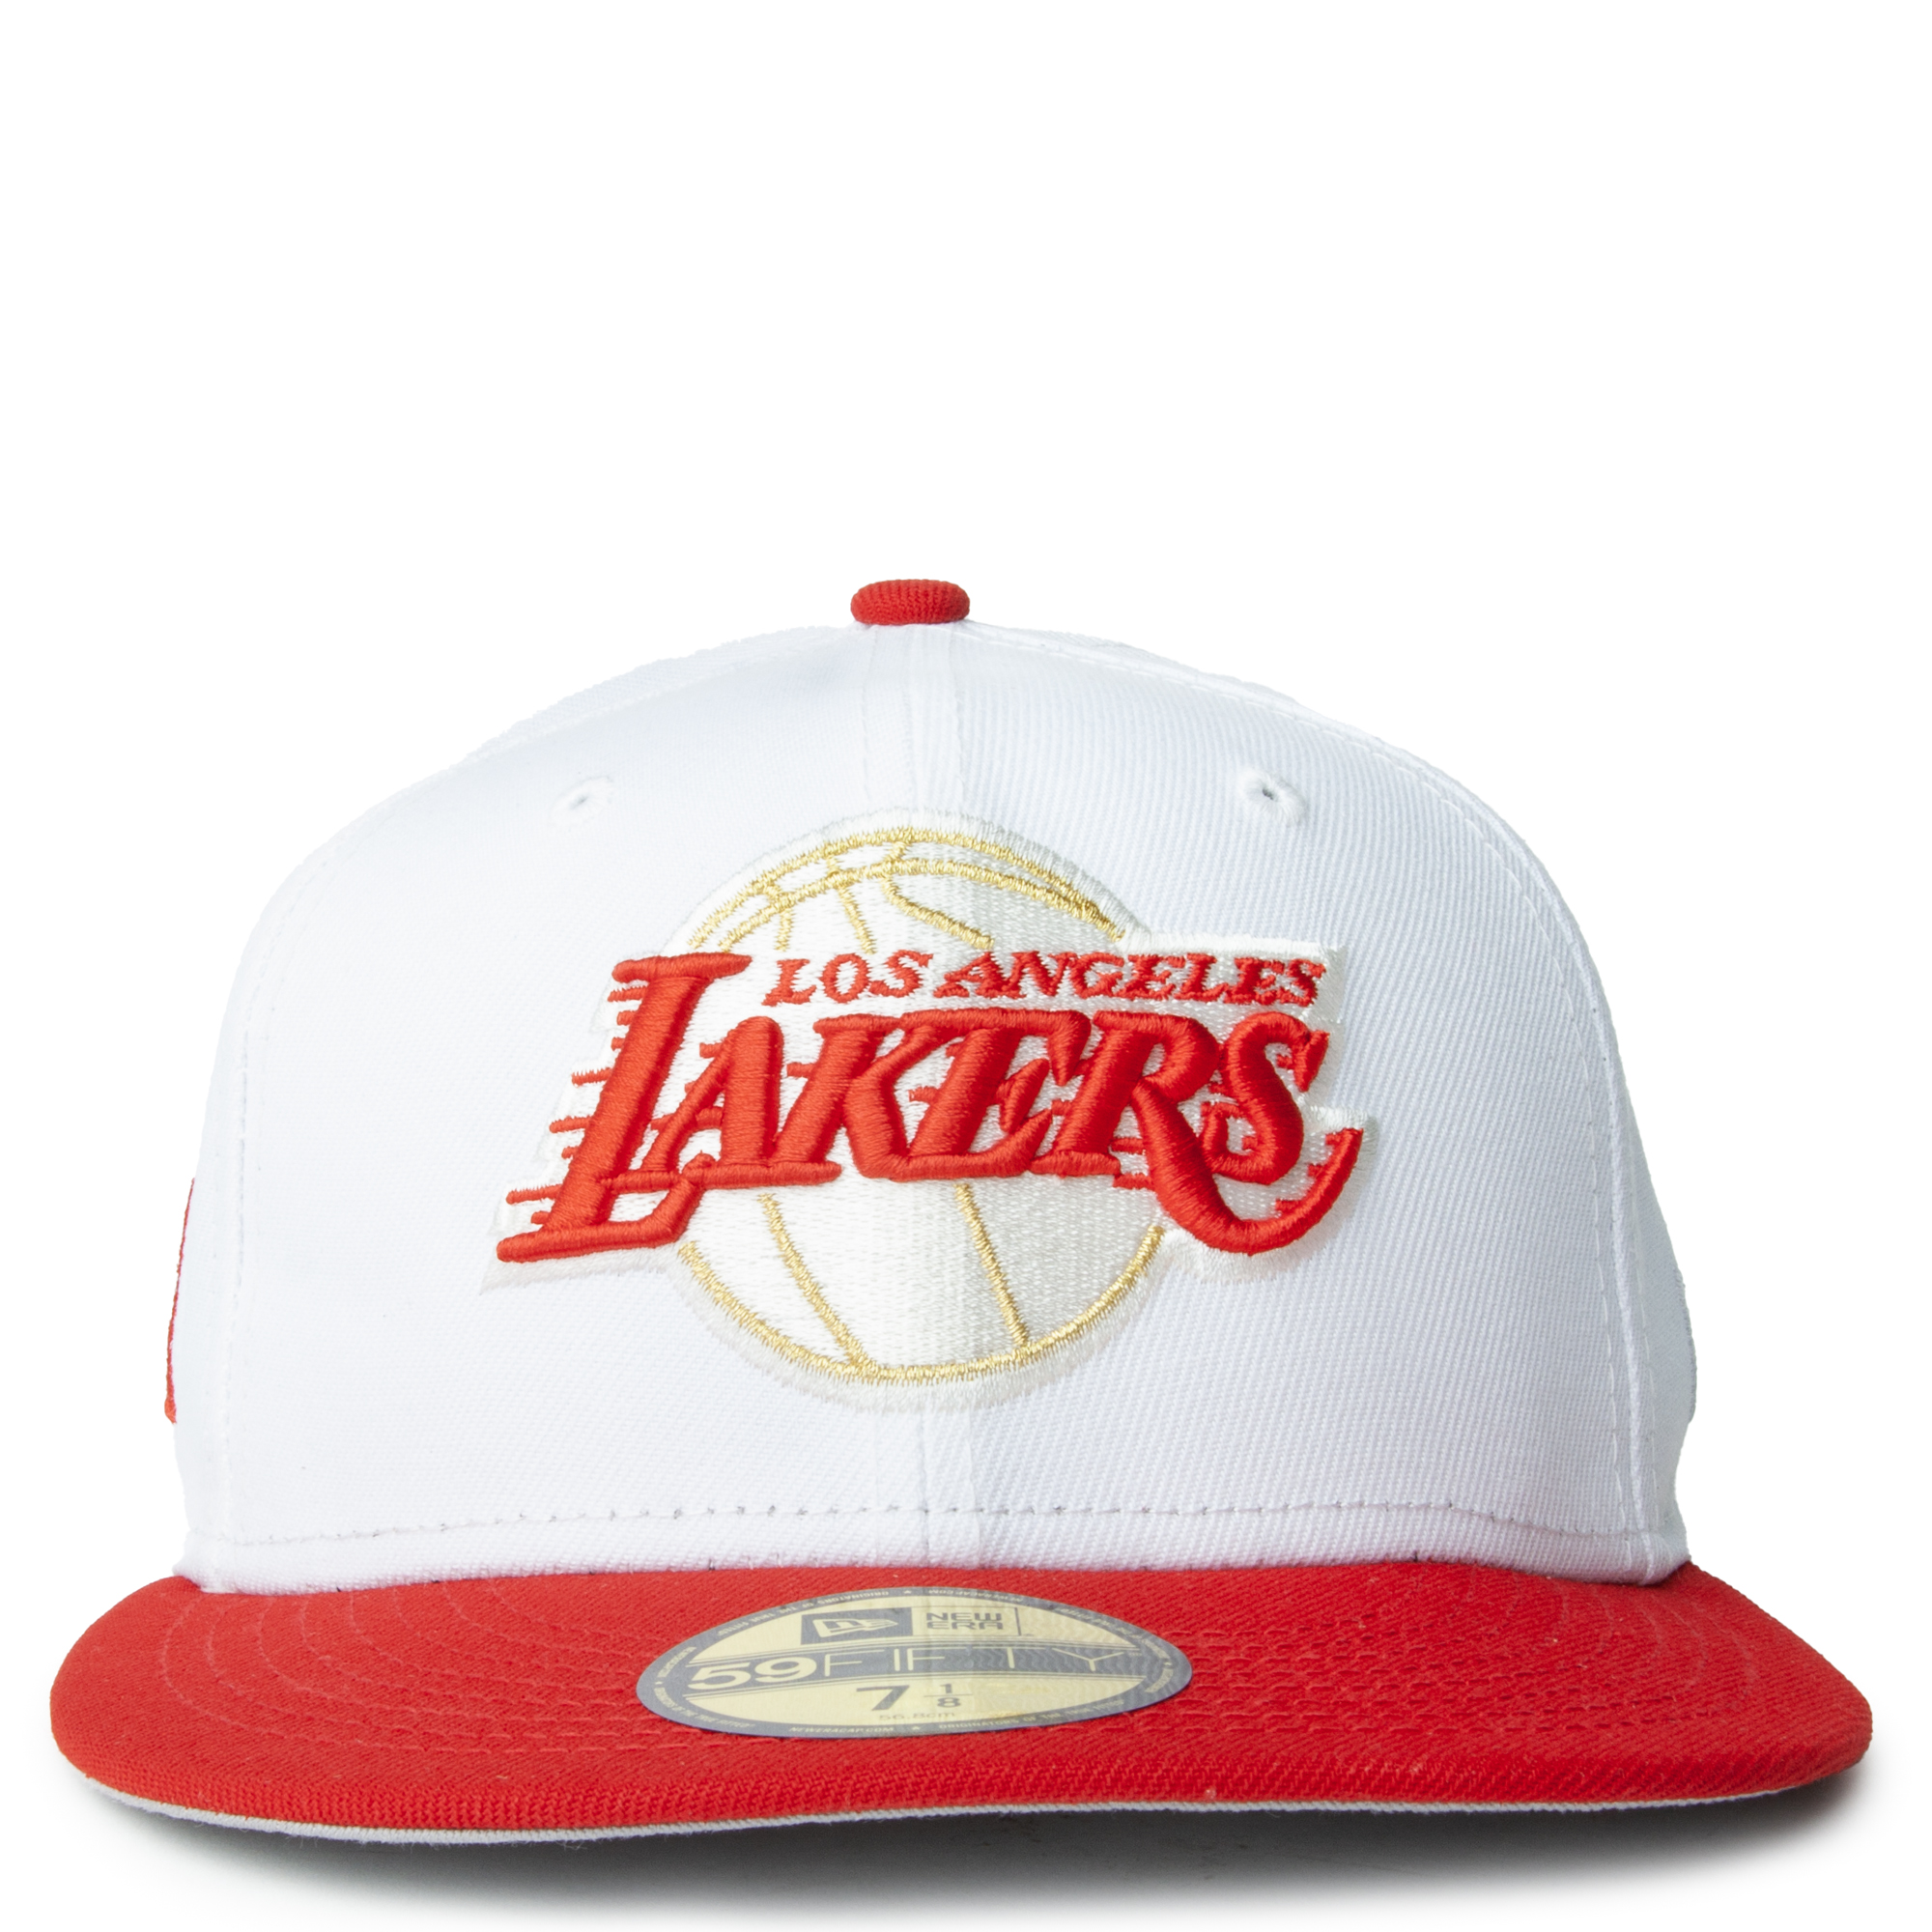 Official Los Angeles Lakers Fitted Hats, Fitted Hats, Caps